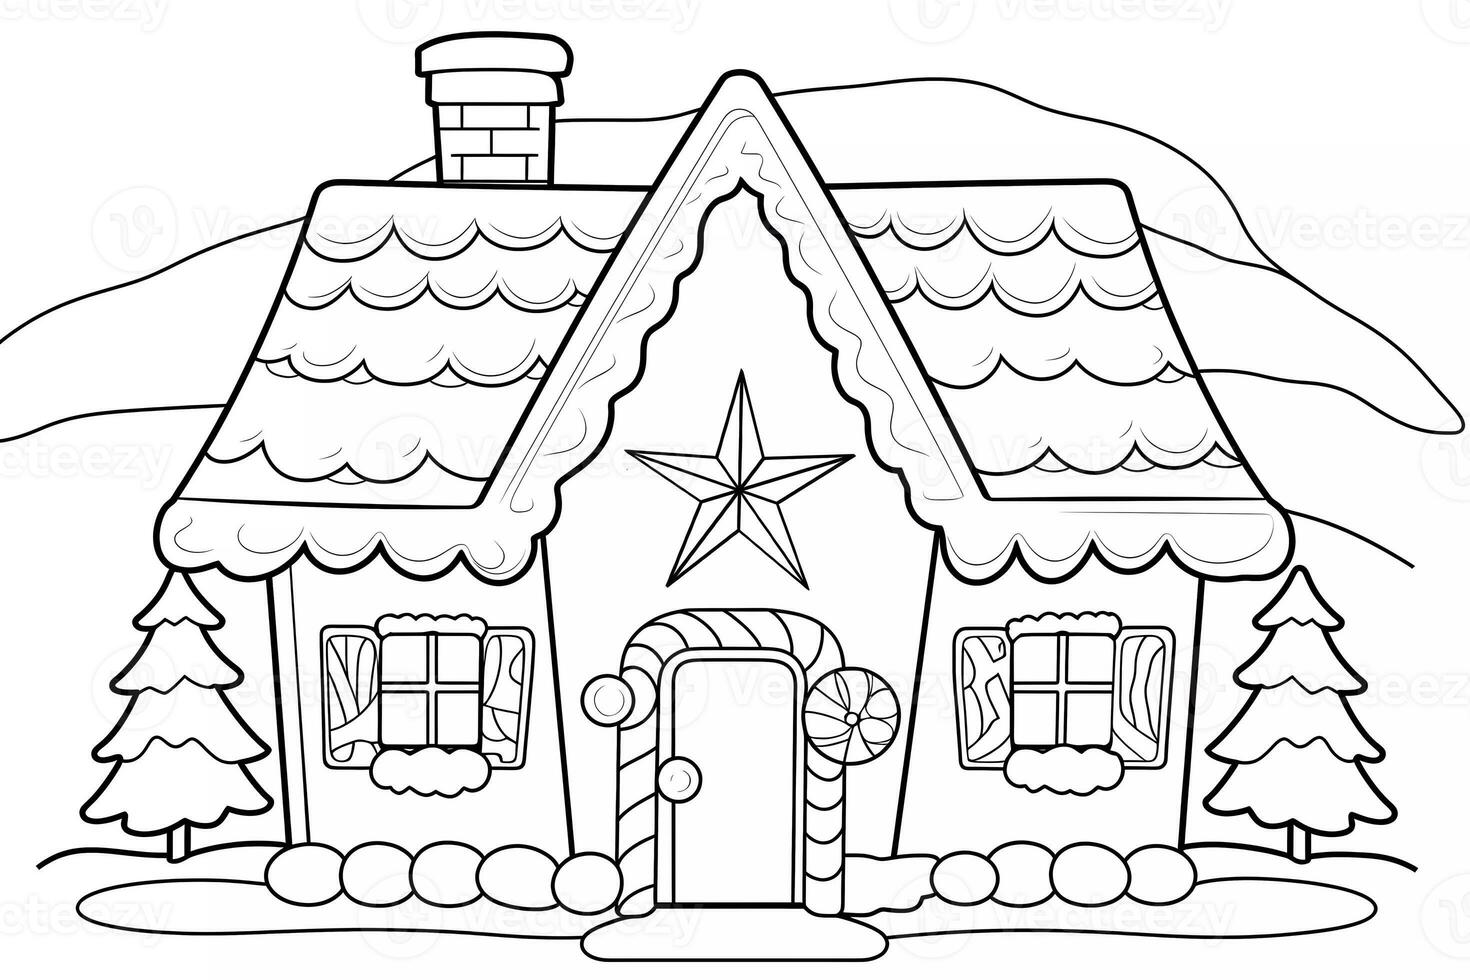 Educational printable coloring worksheet. Coloring gingerbread house shaped cookies with decorations. Winter Christmas theme coloring book page activity for kids and adults. photo